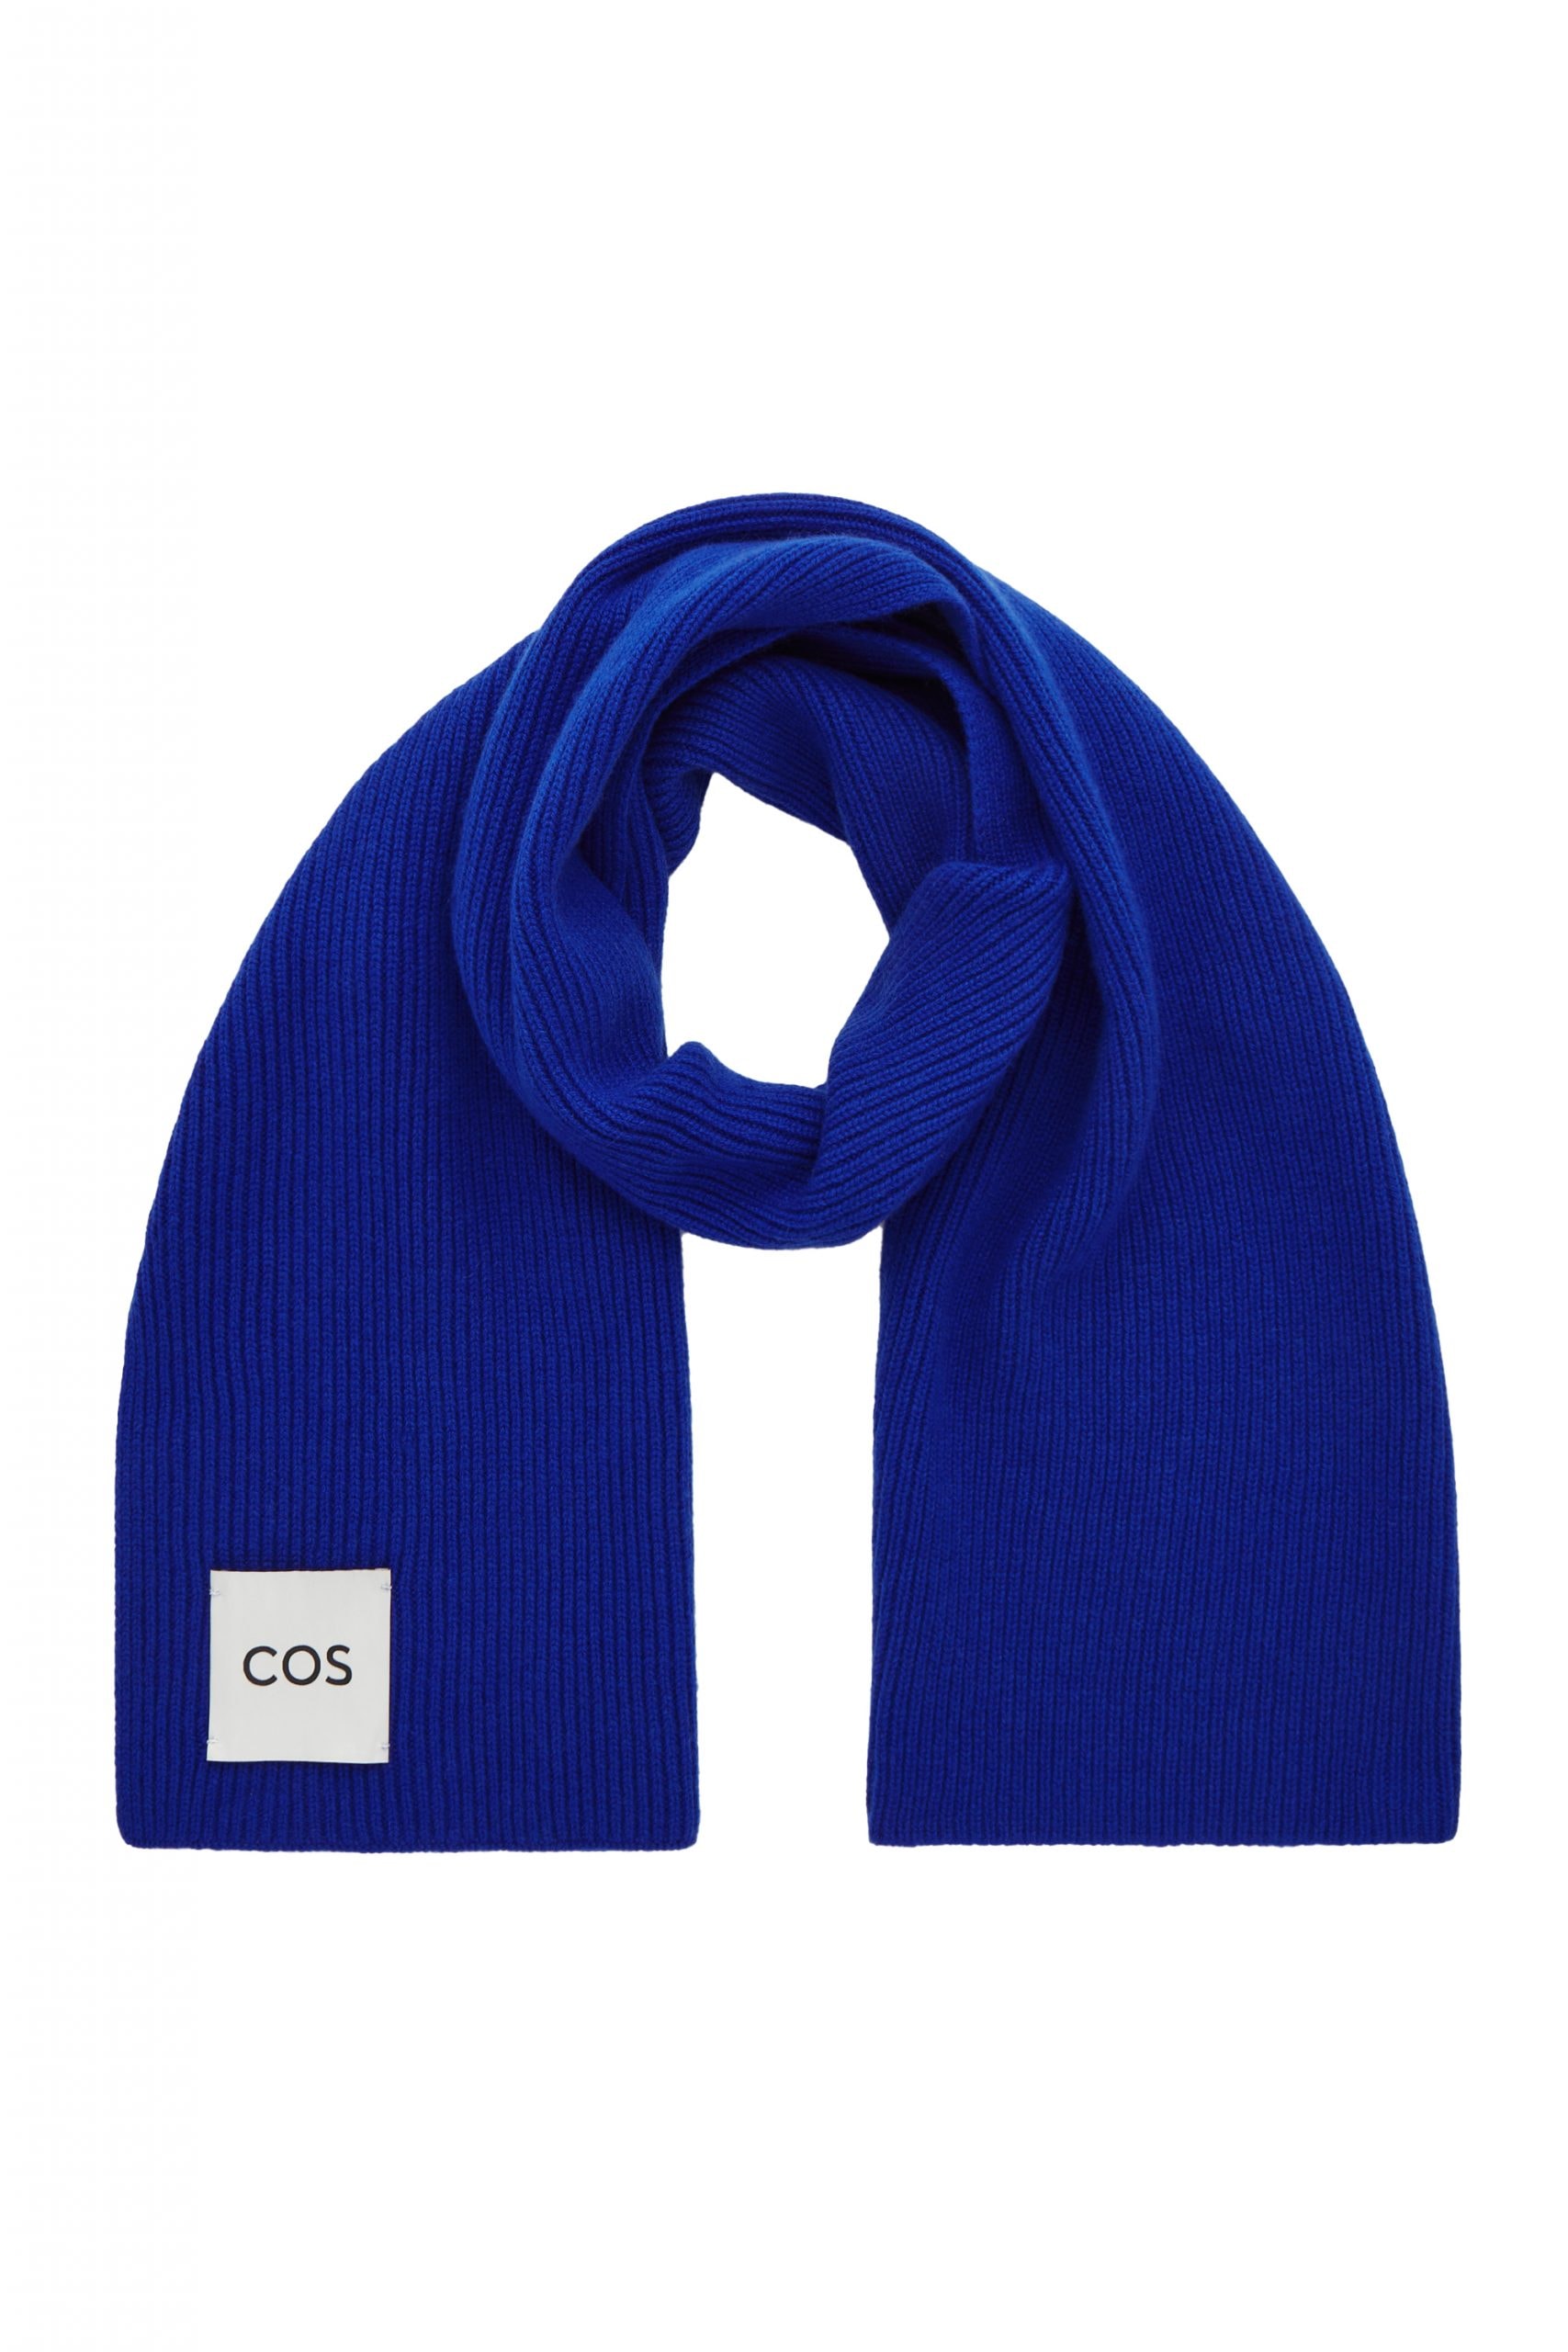 COS 2022 Winter collection